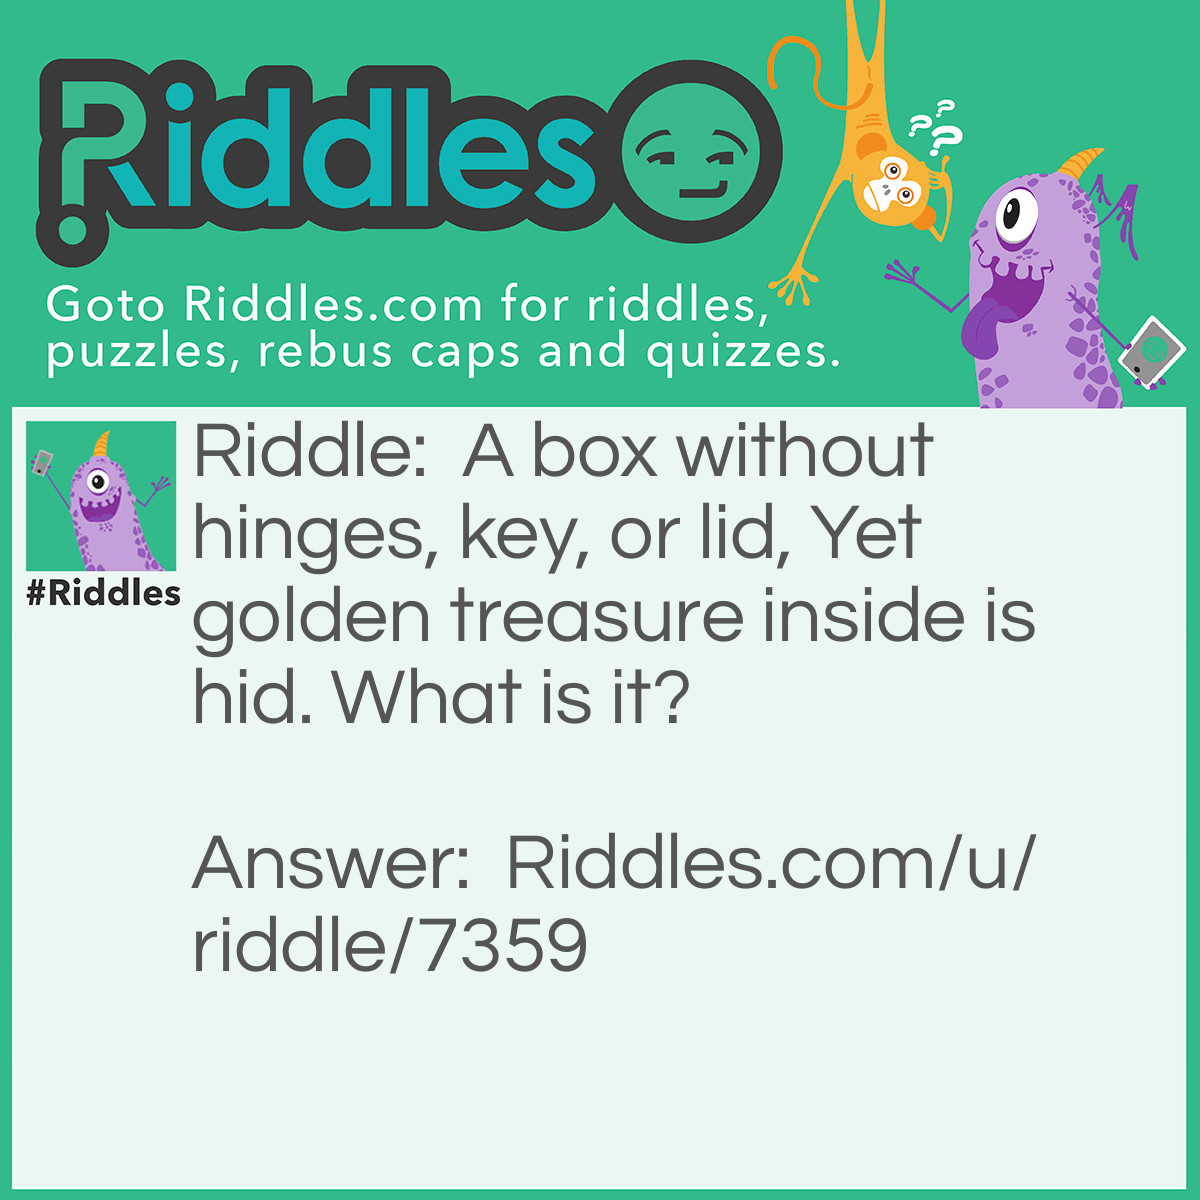 Riddle: A box without hinges, key, or lid, Yet golden treasure inside is hid. What is it? Answer: An egg.